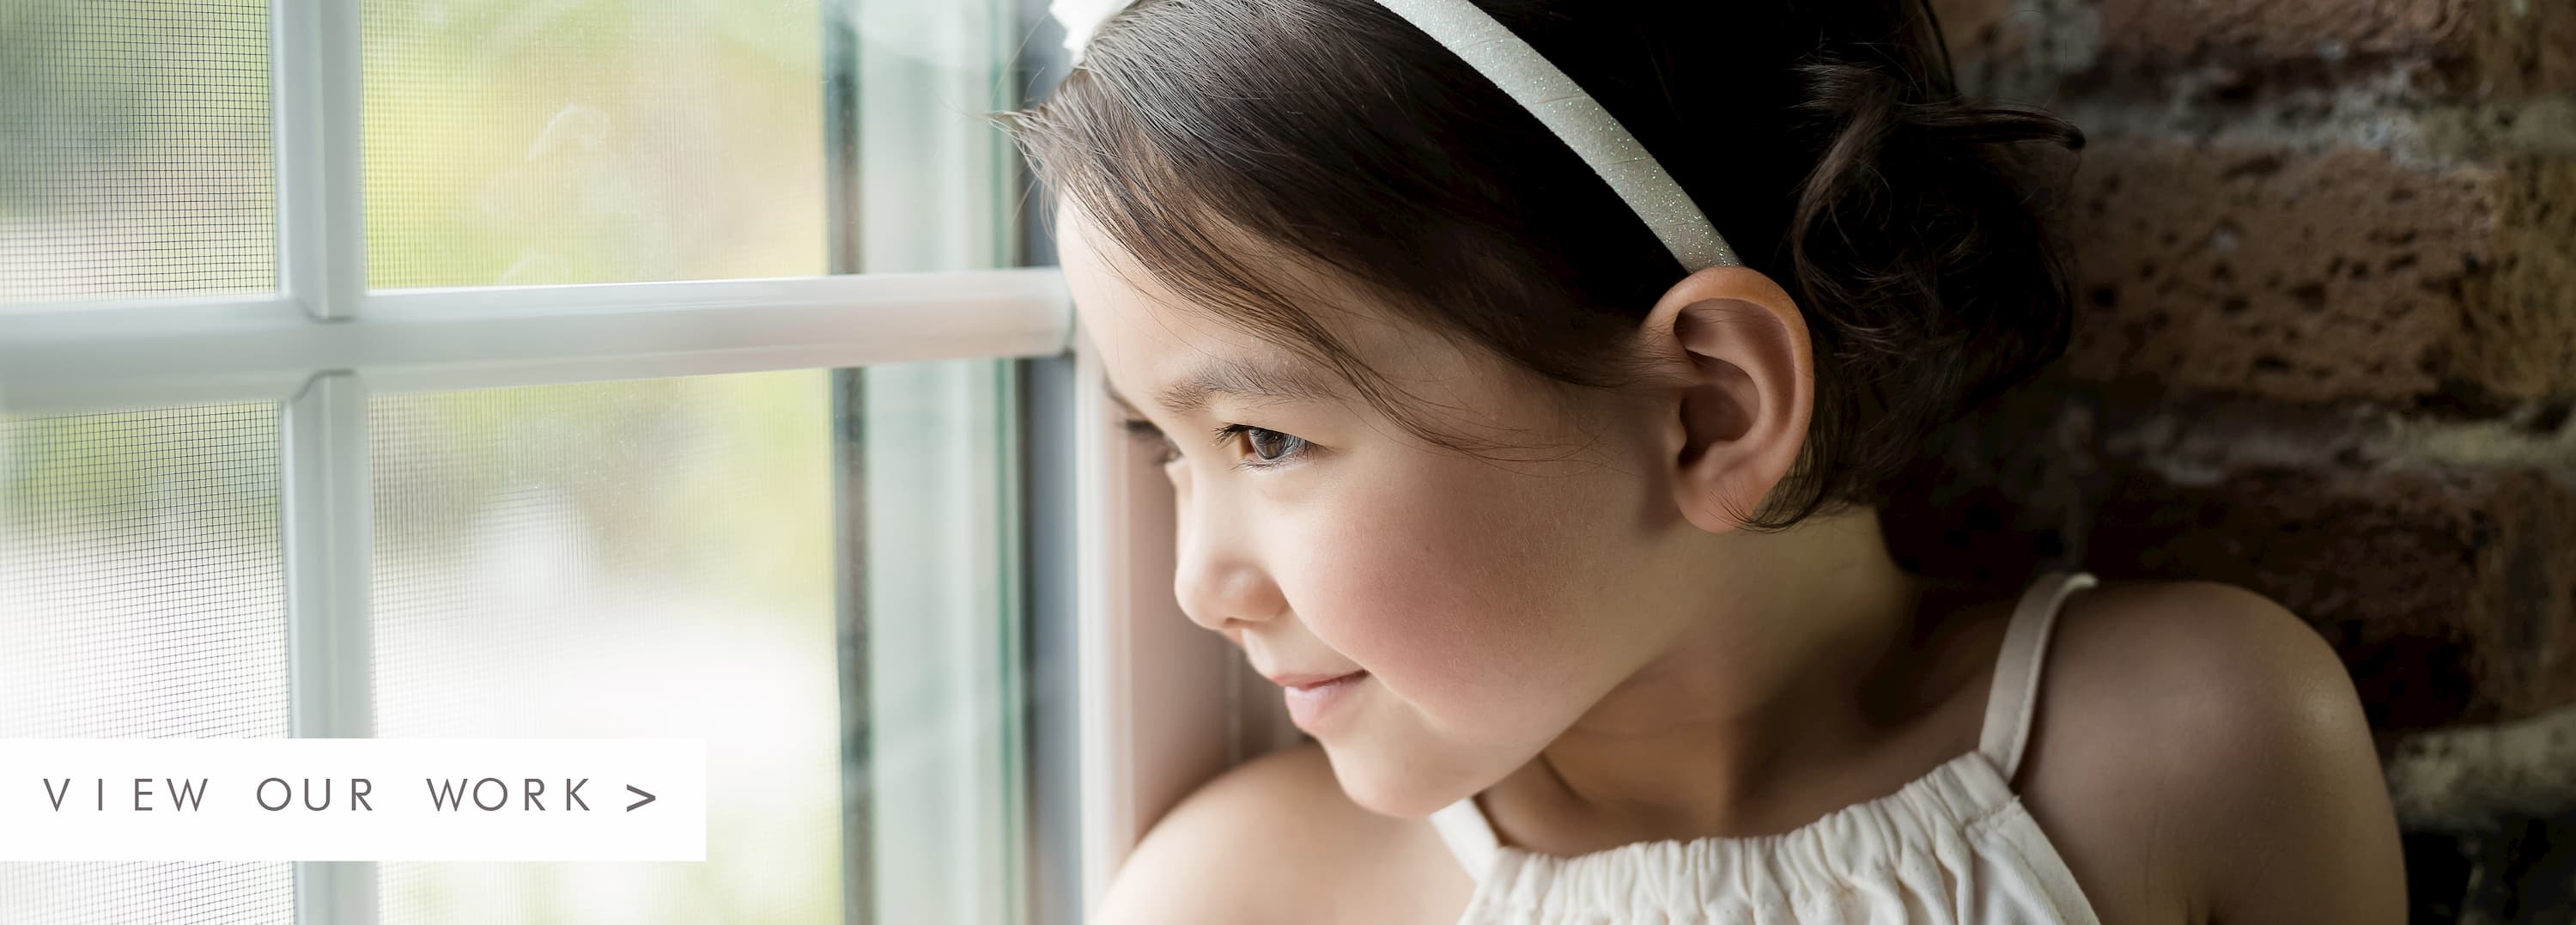 A child with rosy cheeks and a white headband in front of a brick wall looking out a window. To the left there is text to view our work